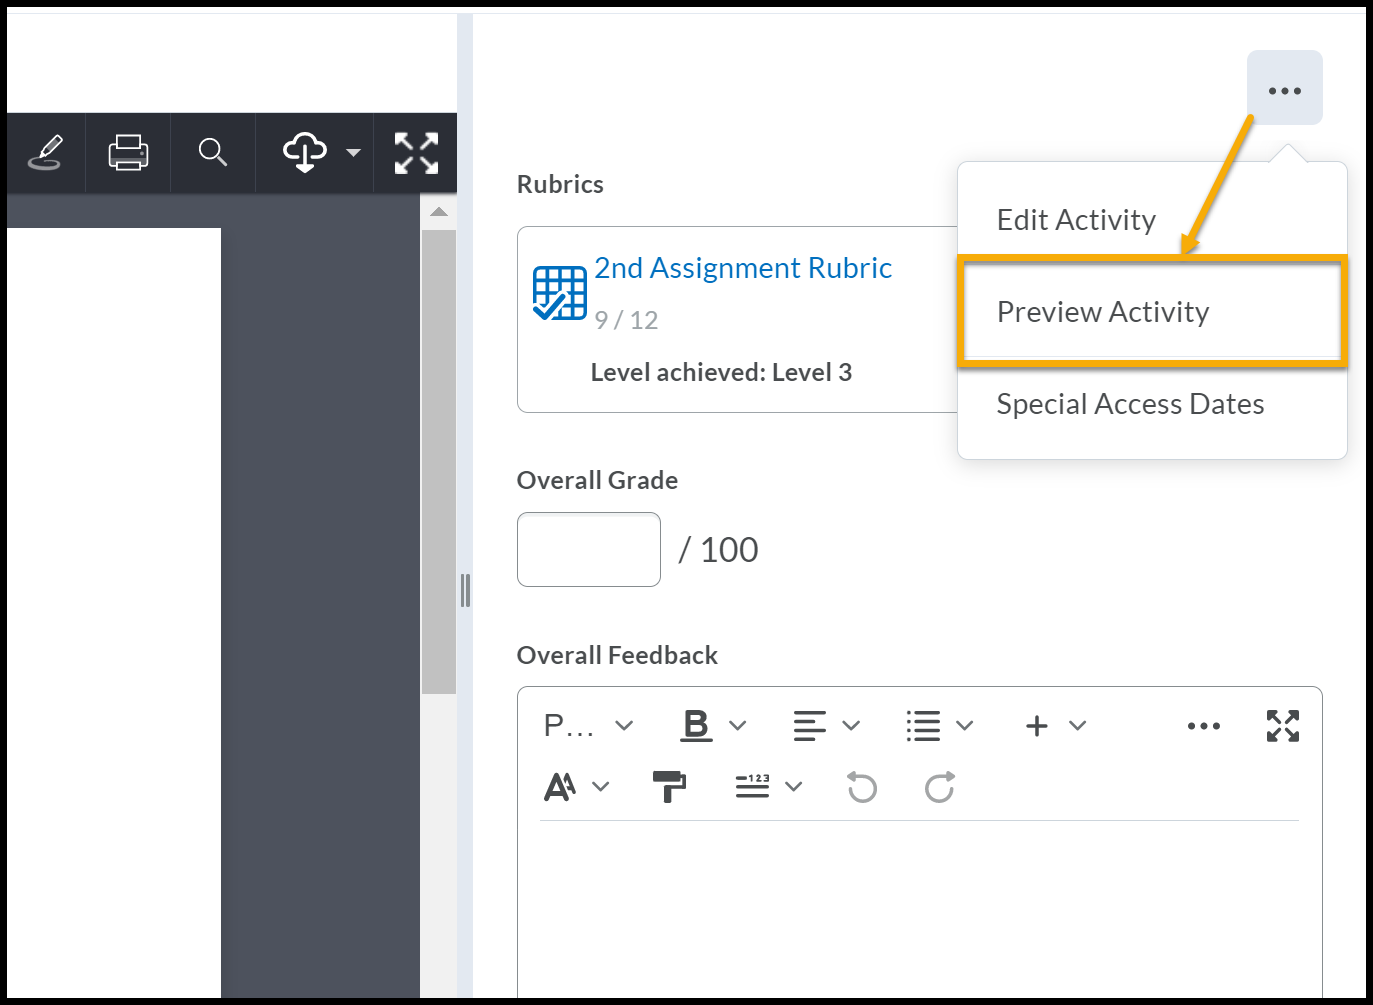 Arrow pointing from the context menu expands to reveal Preview Assignment.